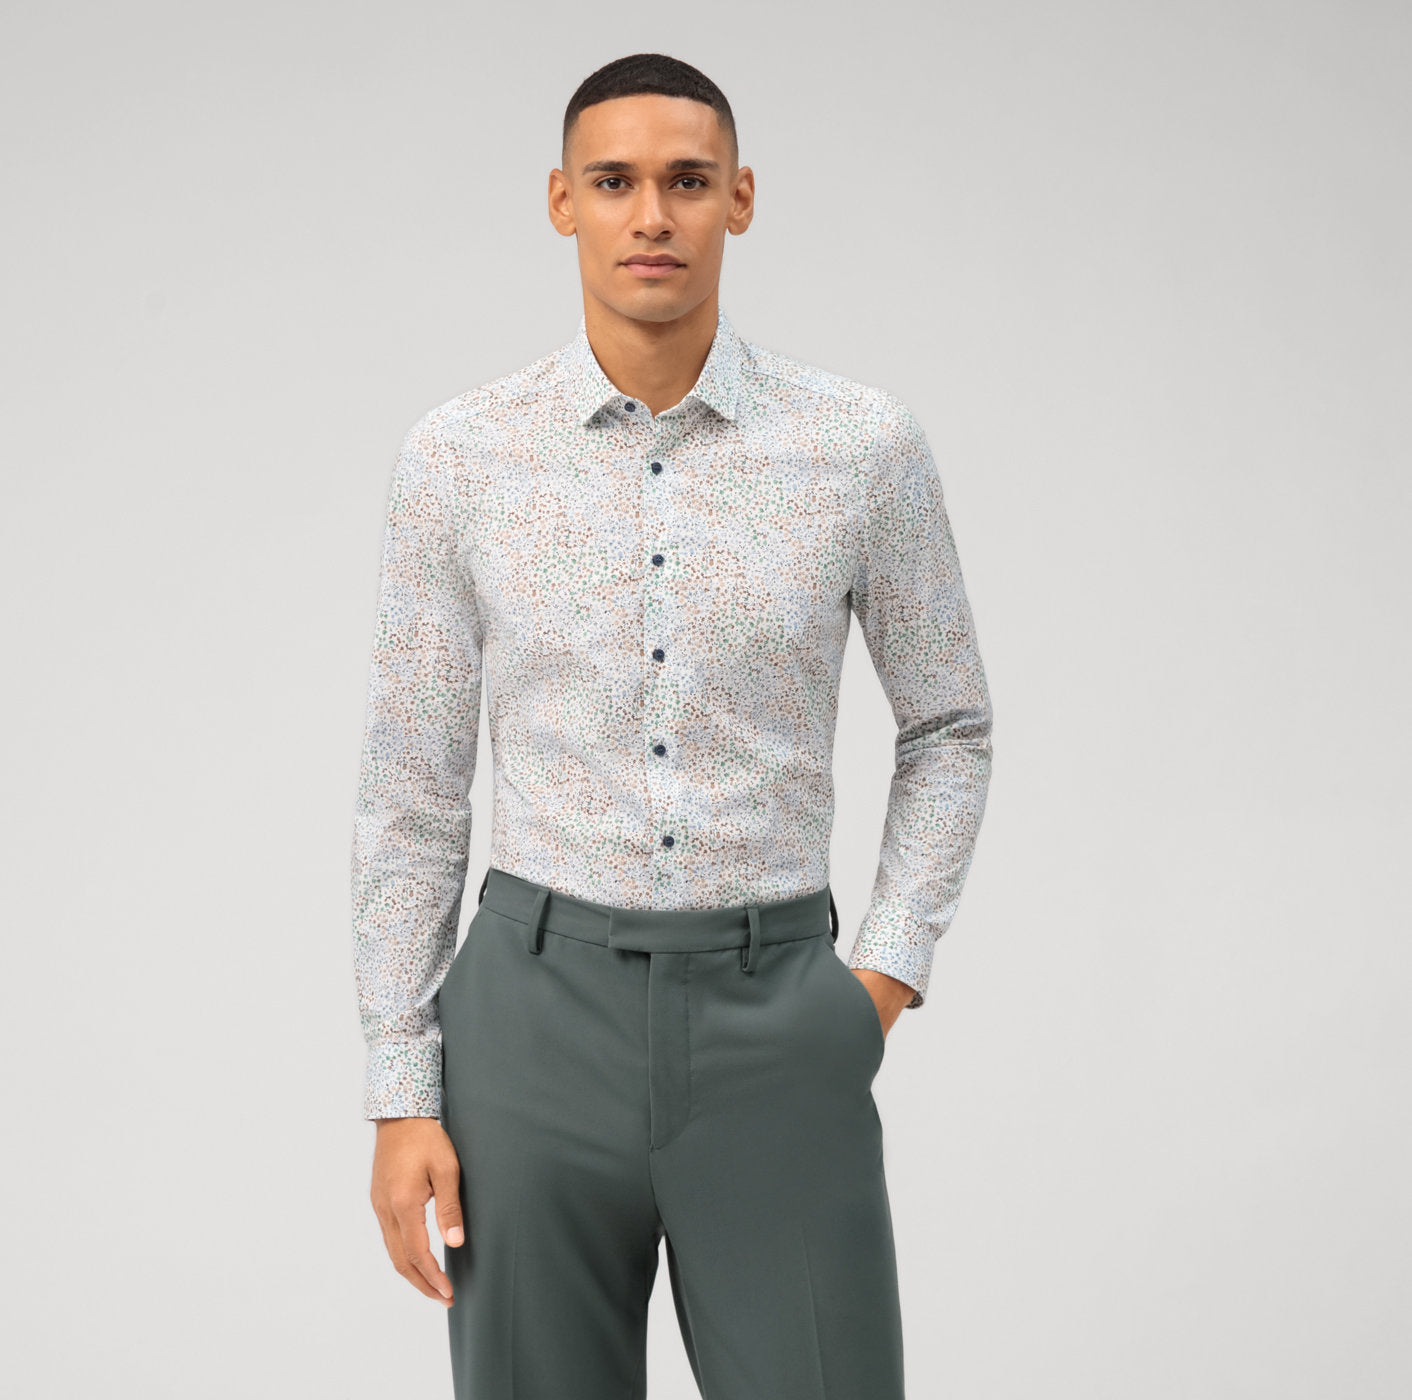 OLYMP Luxor Body Fit, Business Shirt, Global Kent, Green Floral